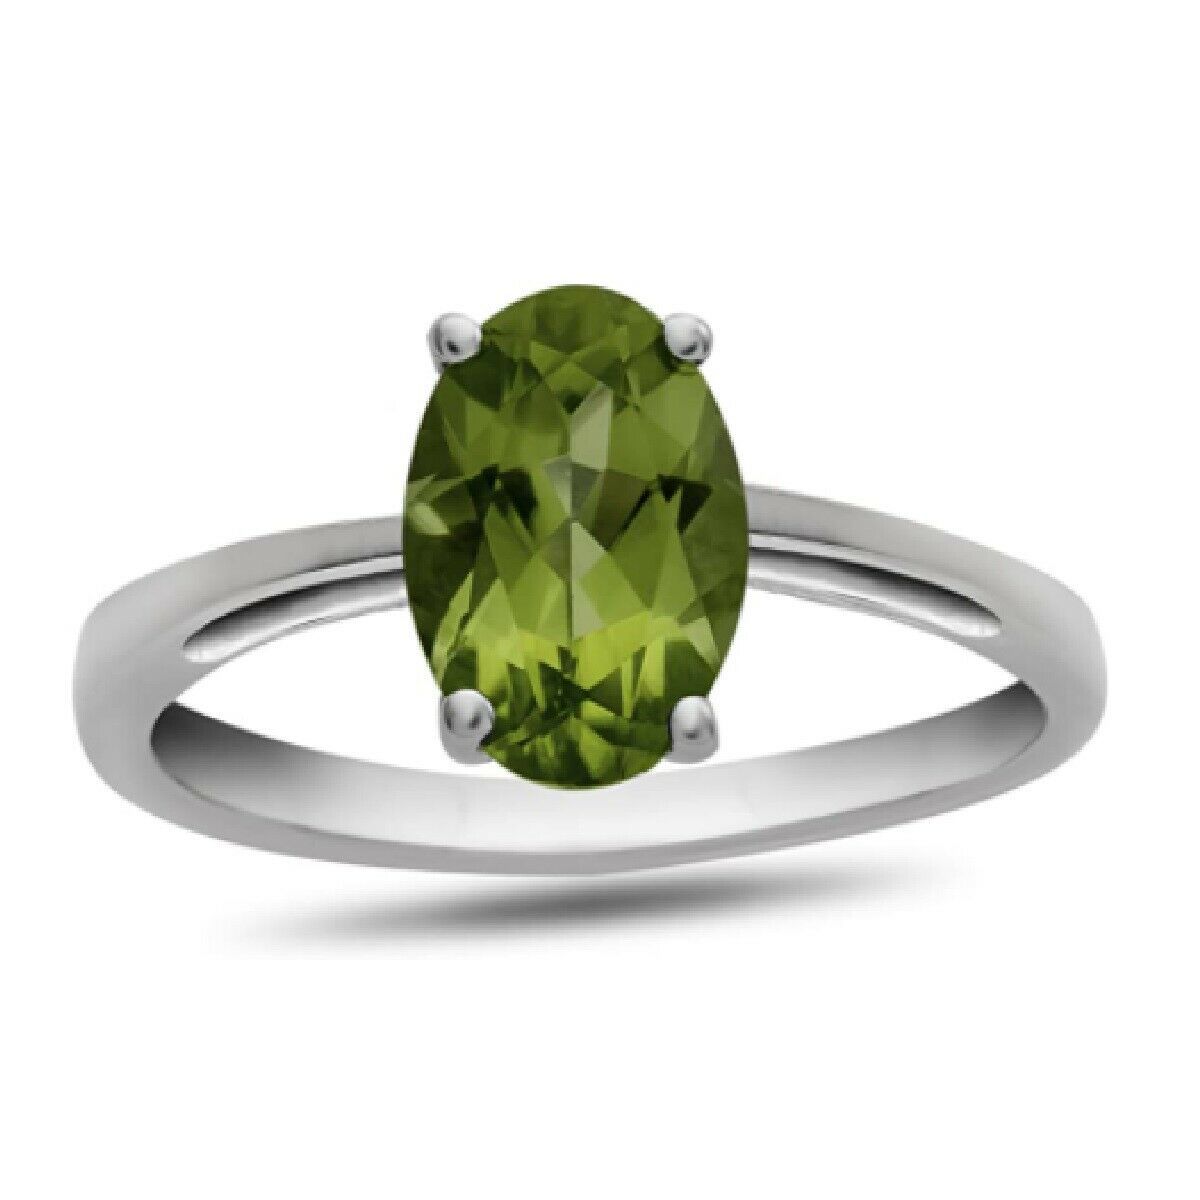 4-Prong Set 9K White Gold 1 Ctw Oval Peridot Gemstone Solitaire Stacking Ring